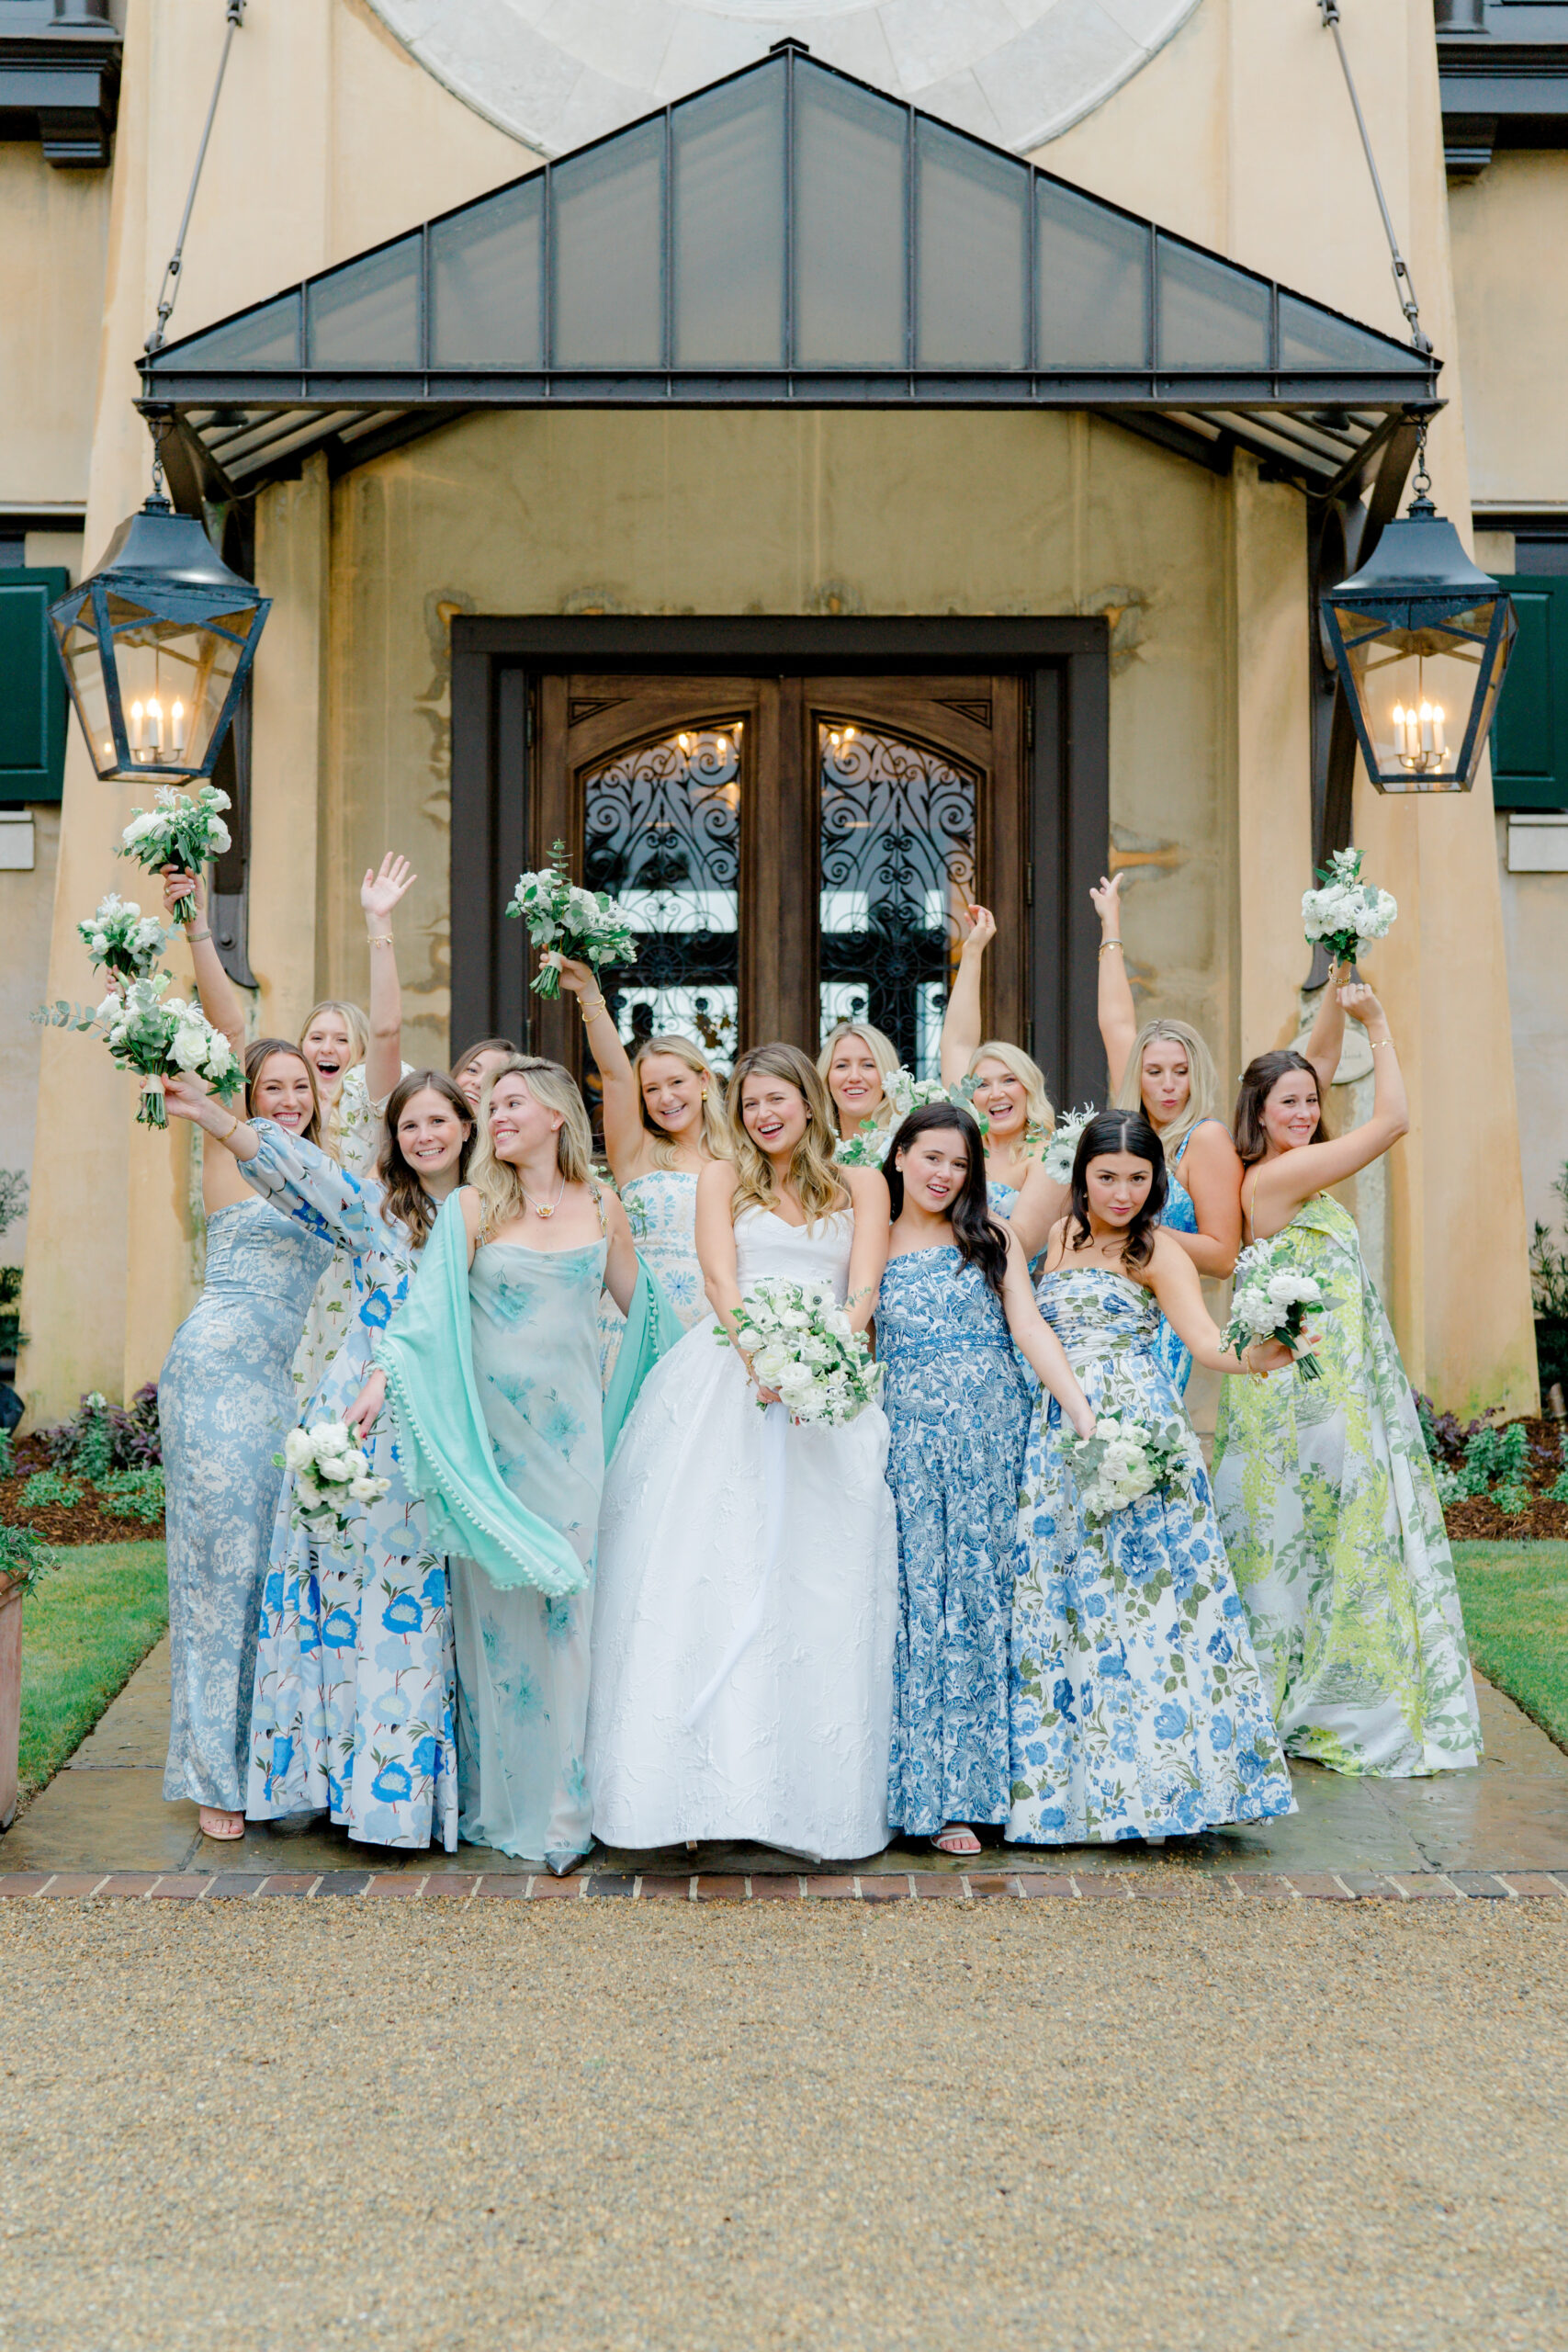 Bride with bridesmaids celebrating with their flowers in the air. 